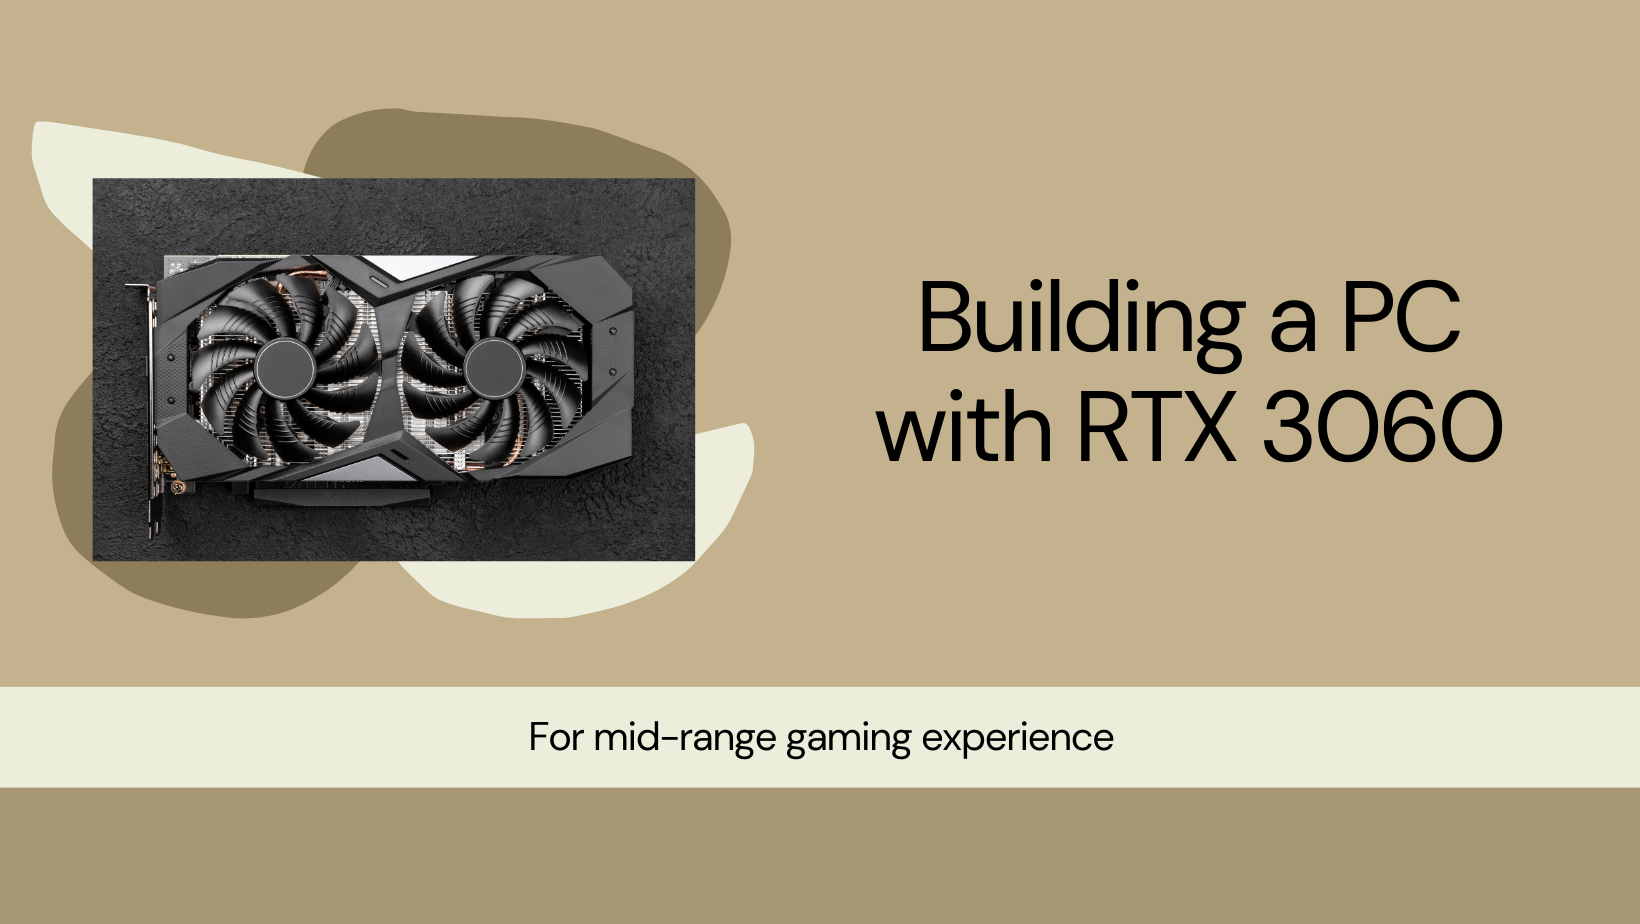 Building a PC with the RTX 3060: Mid-Range Gaming and Performance